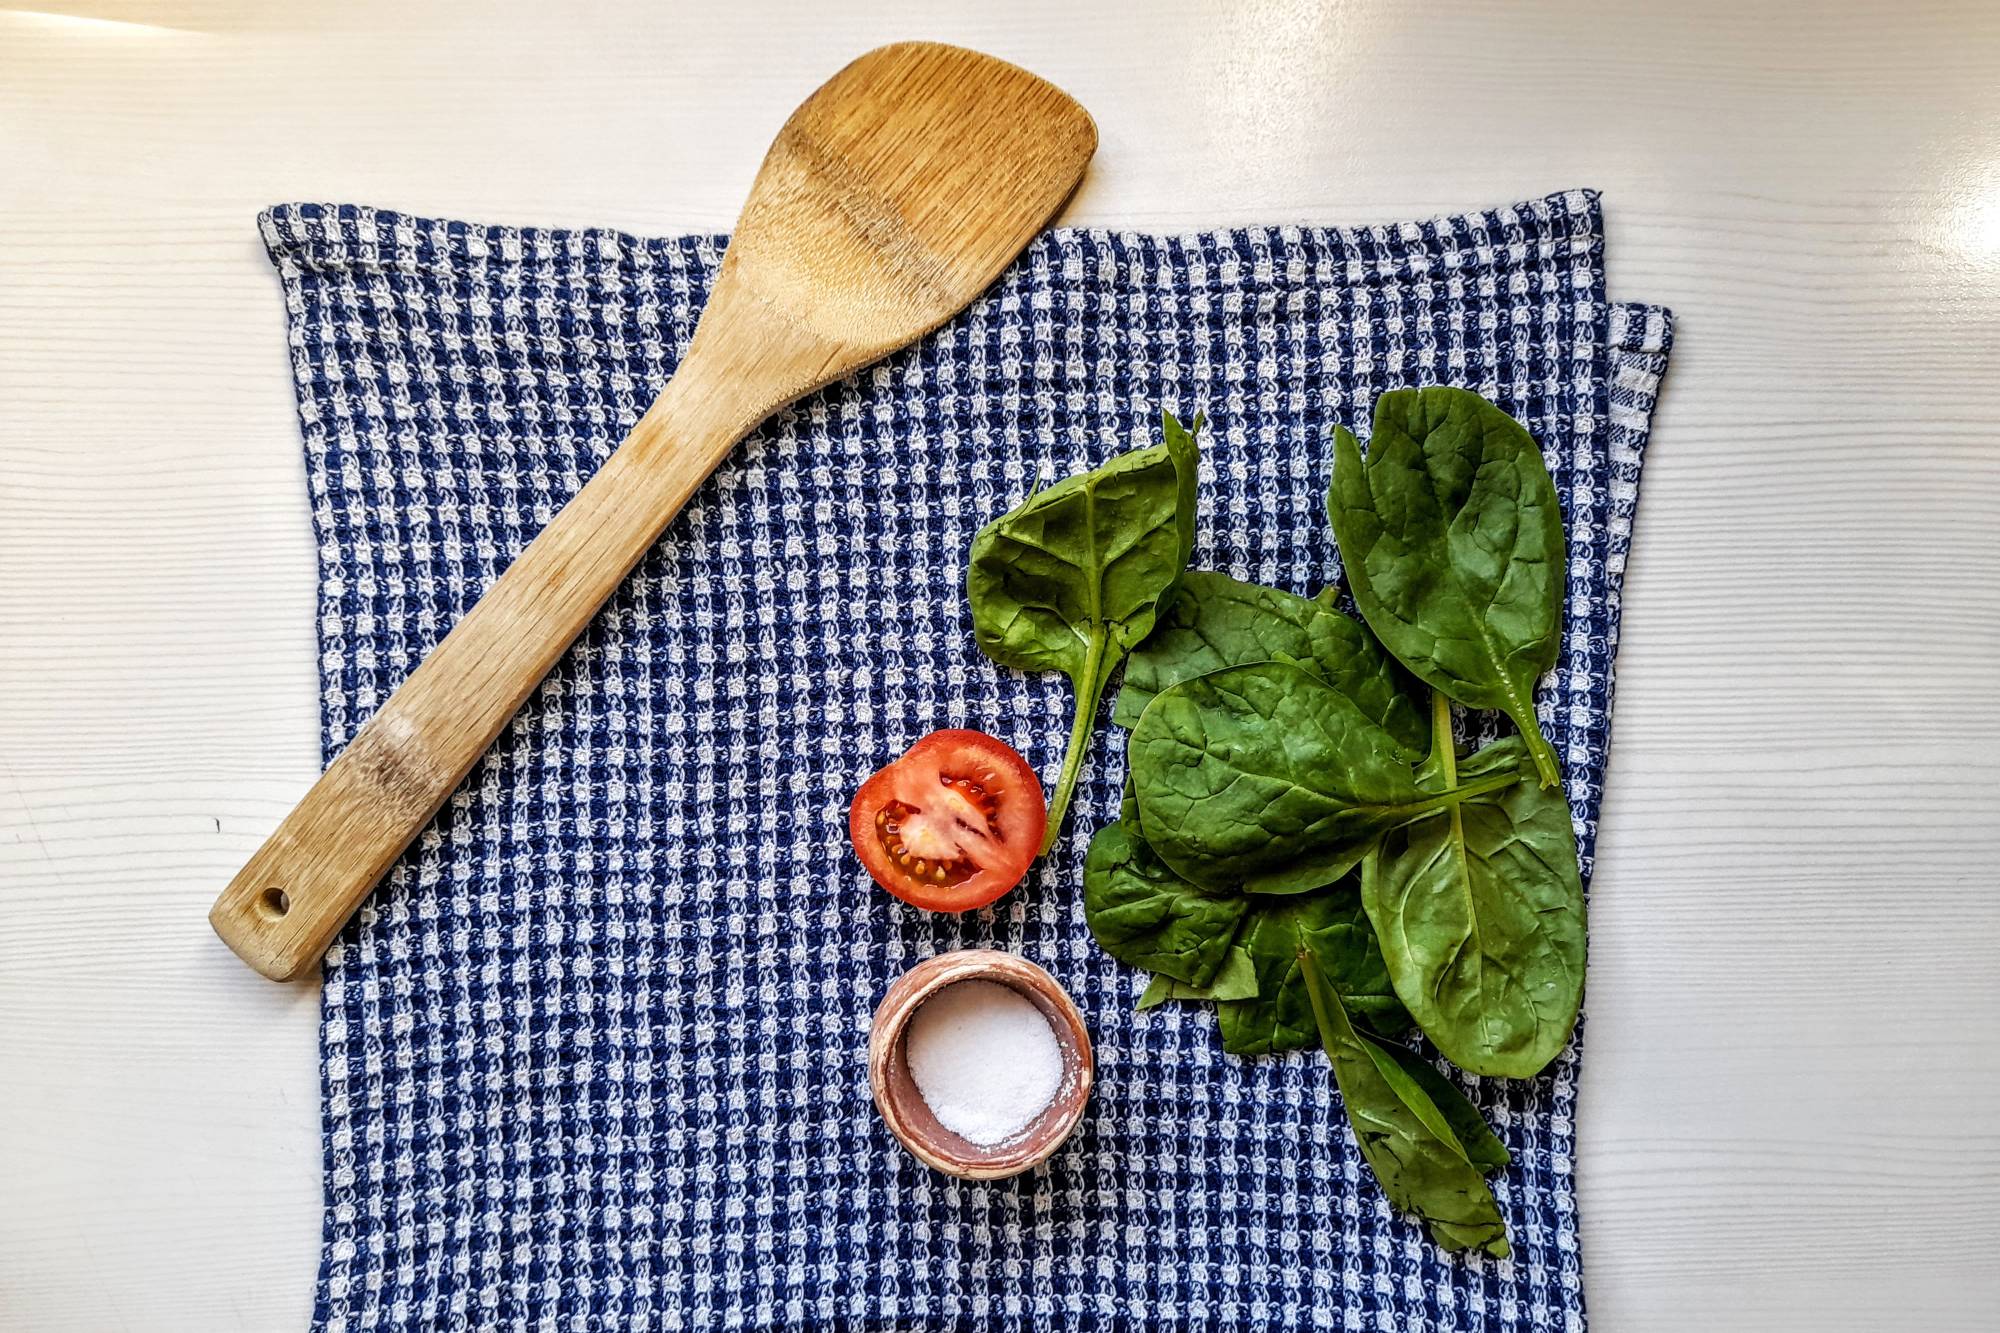 Bamboo spoon on a cloth next to salad ingredients